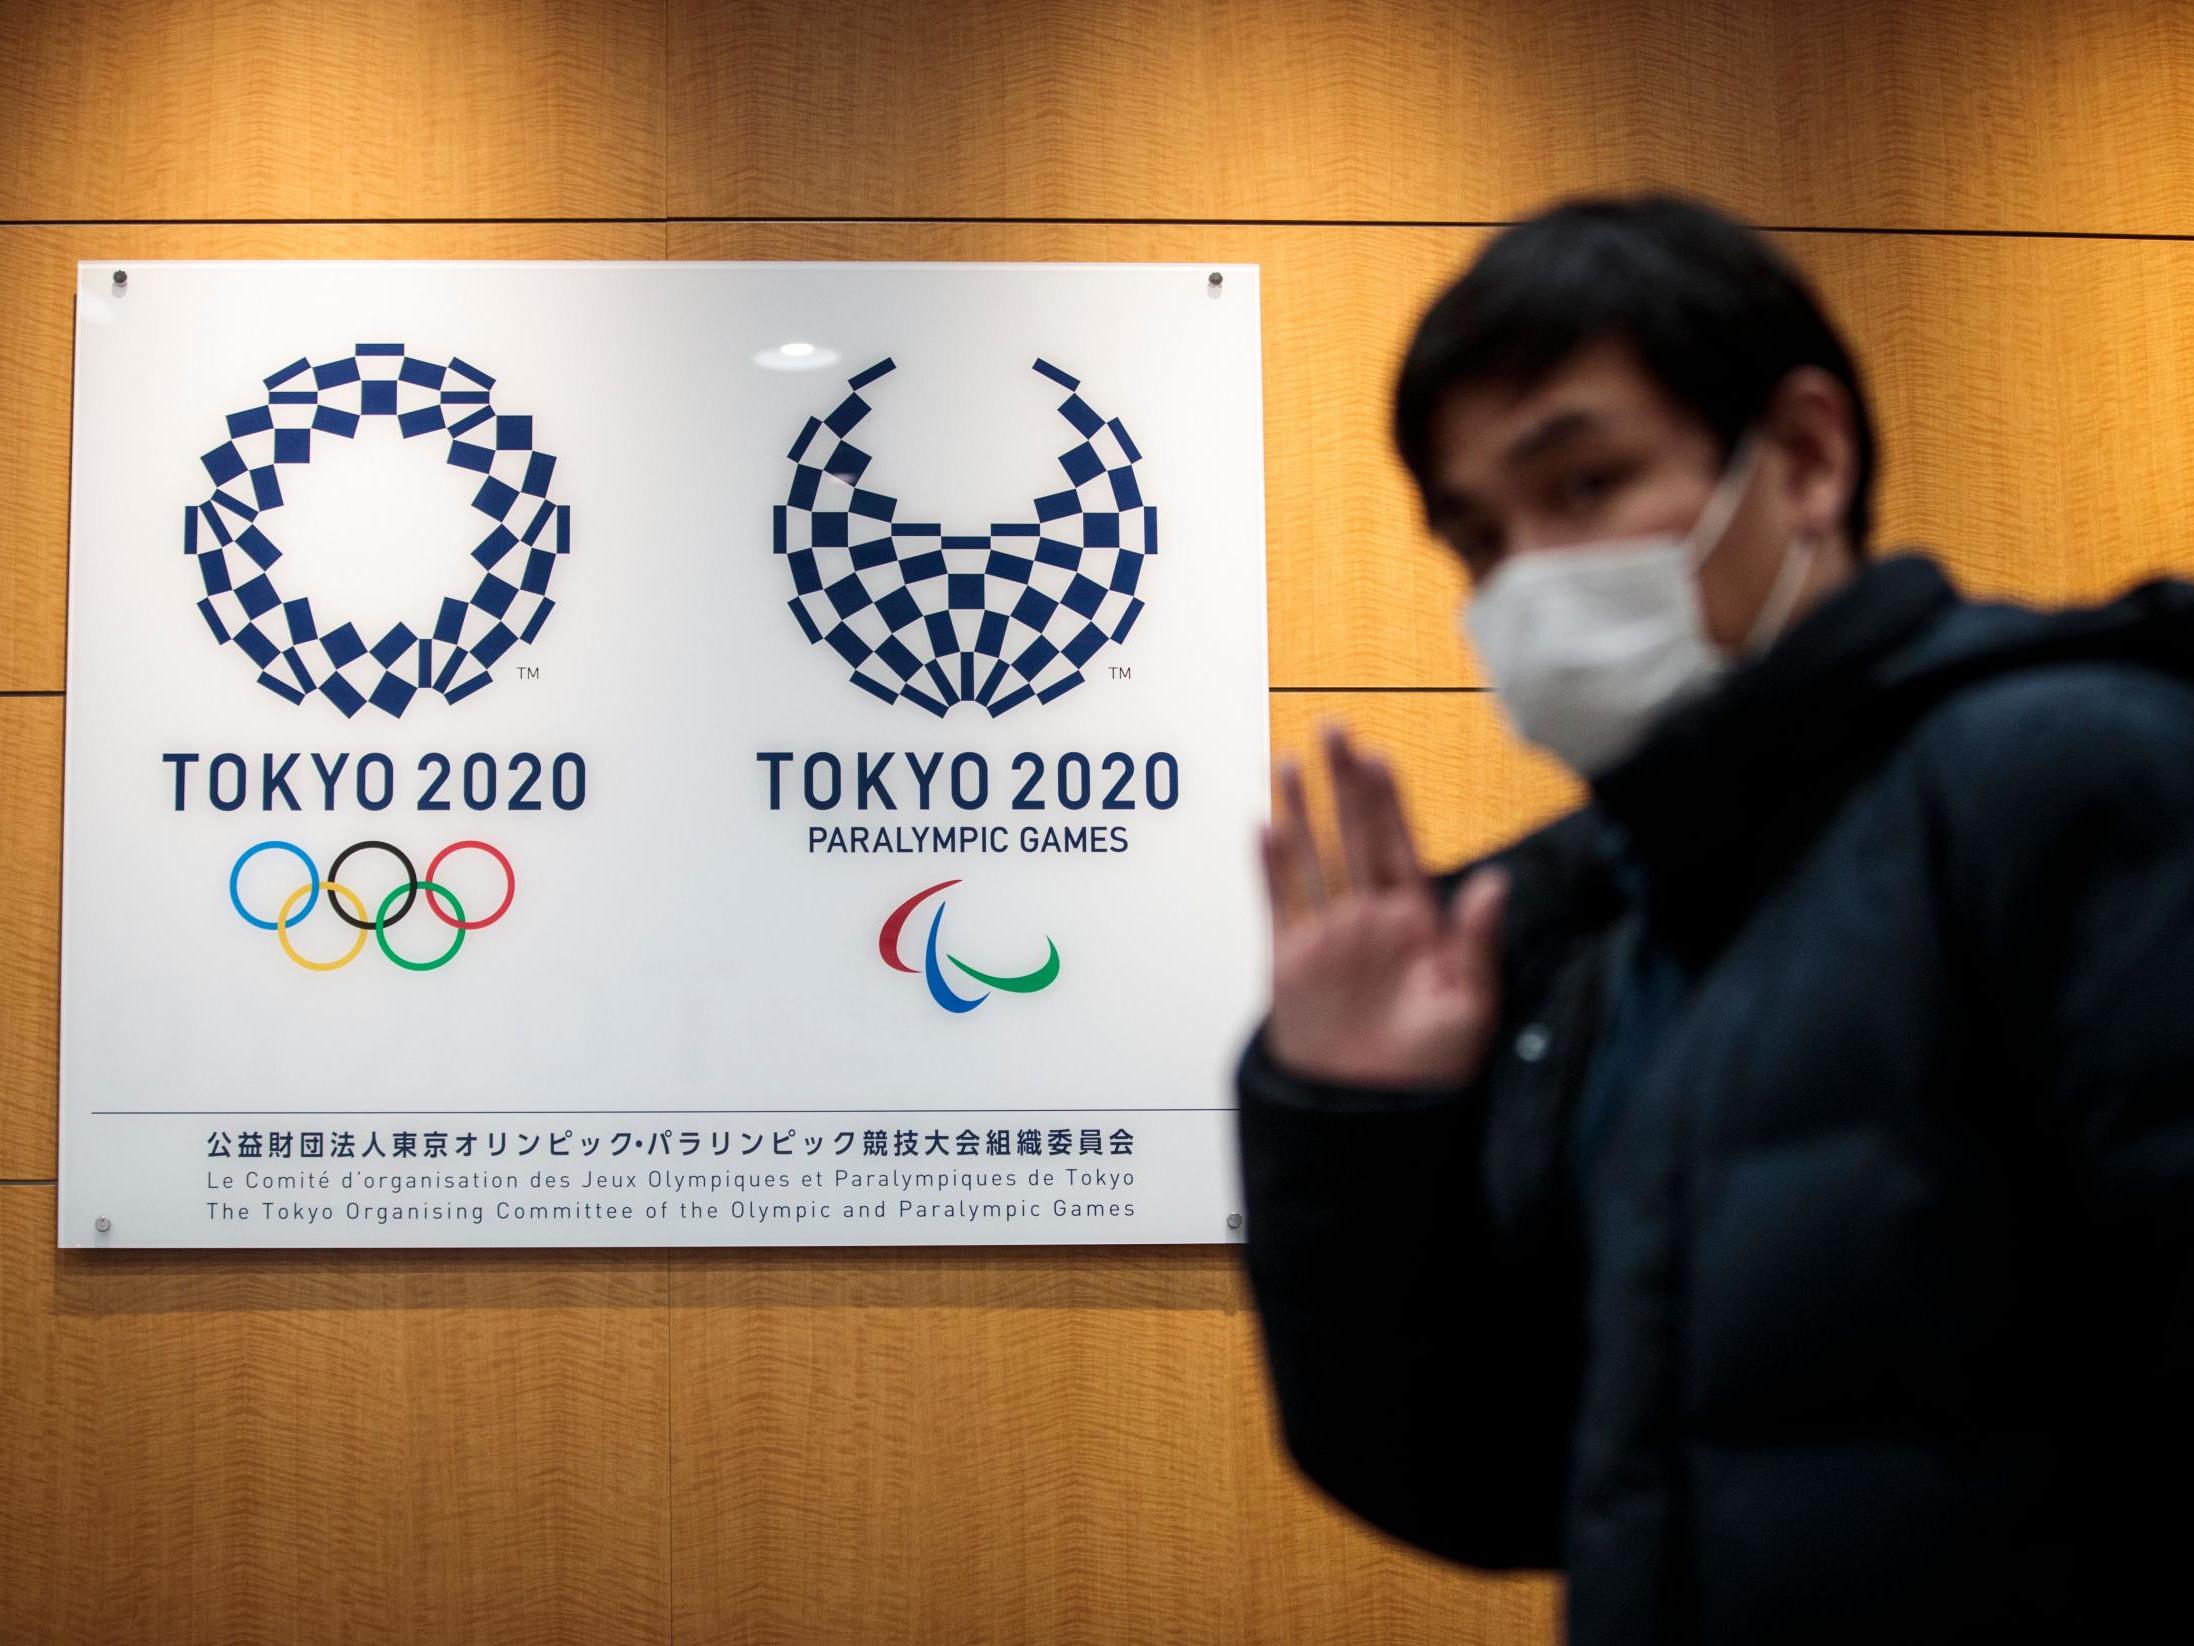 The Tokyo 2020 Olympic Games have been postponed until 2021